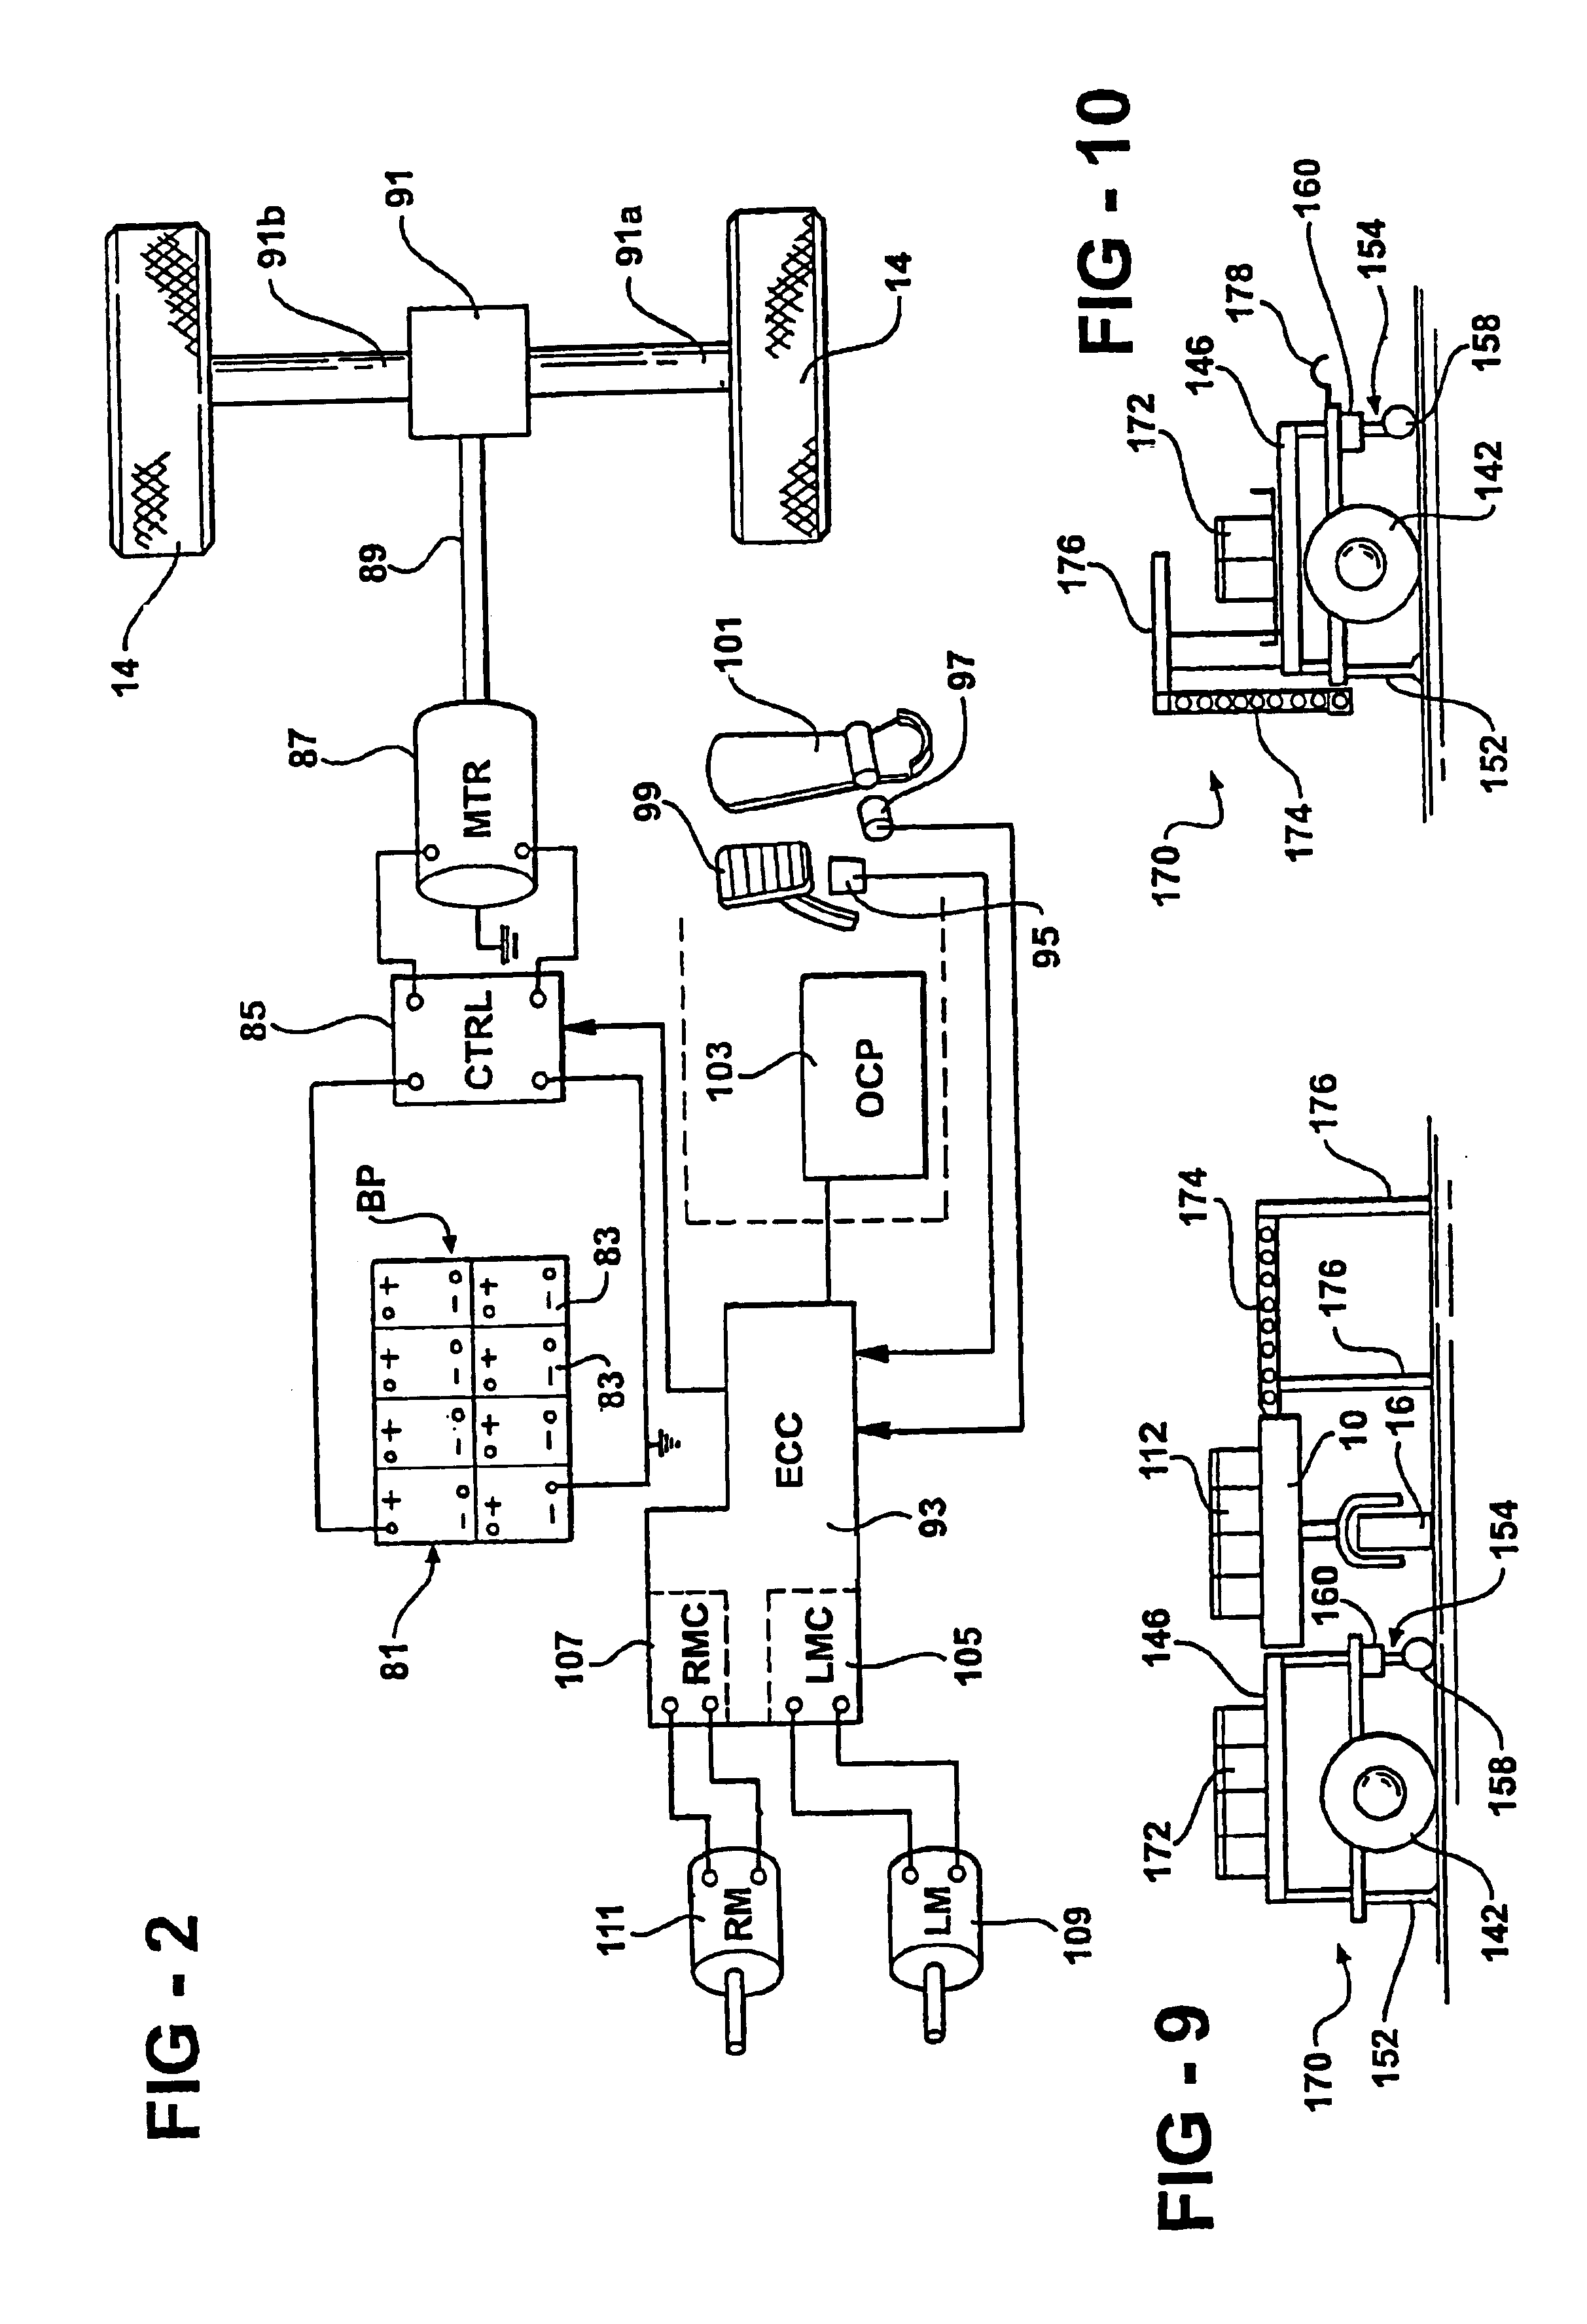 Electric drive mower with trailed auxiliary power source